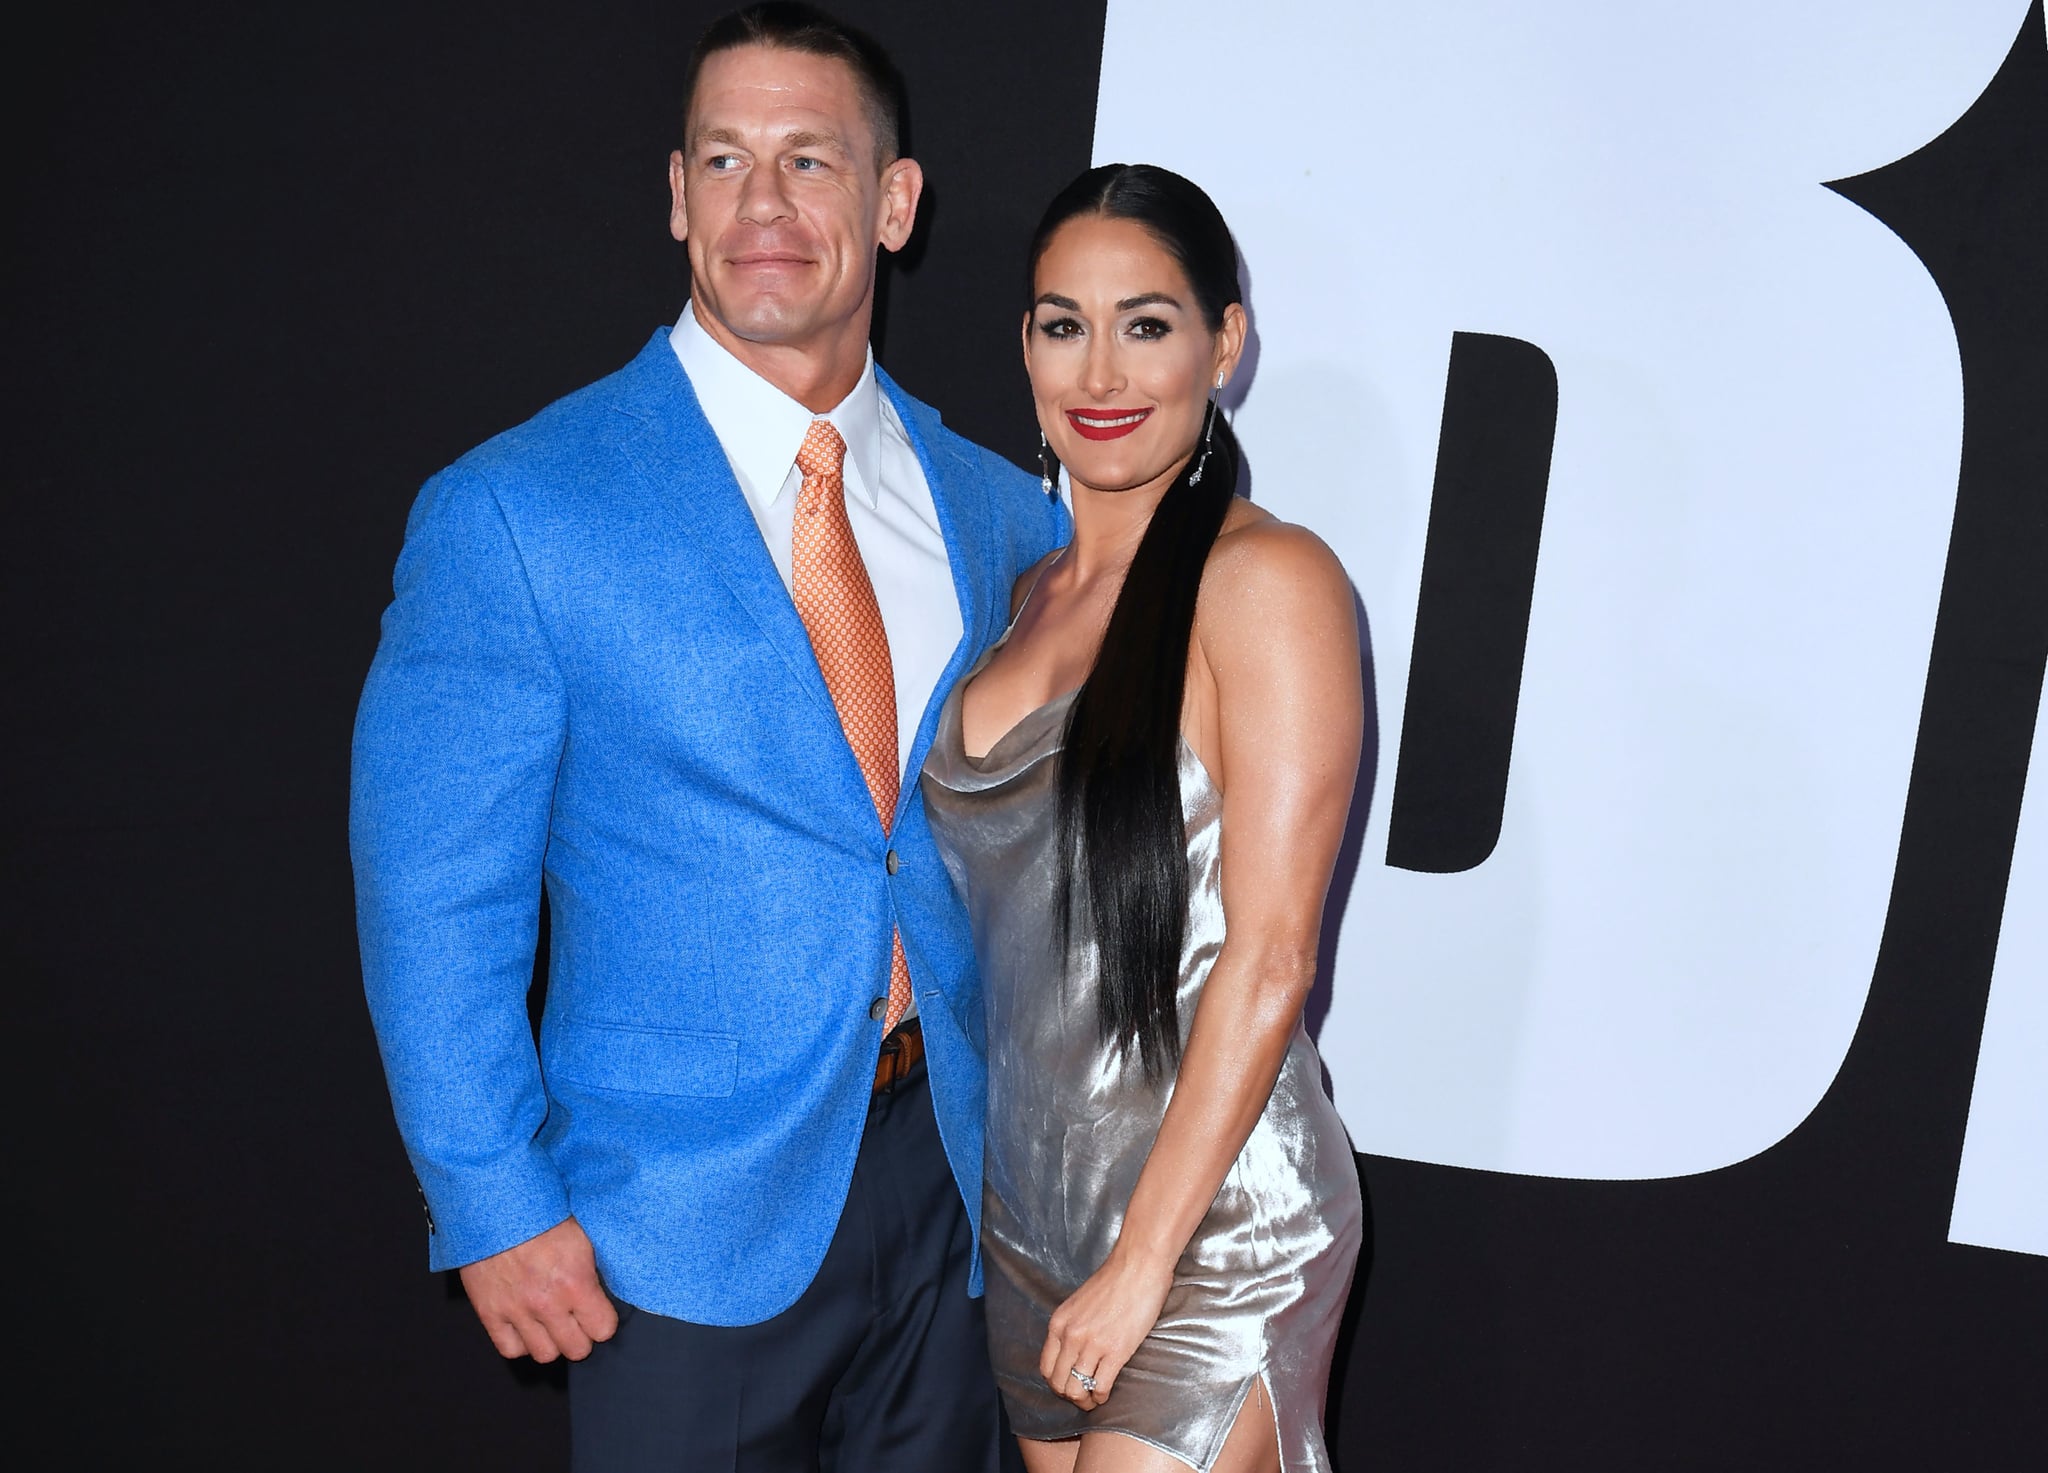 John Cena and Nikki Bella arrive for the premiere of 